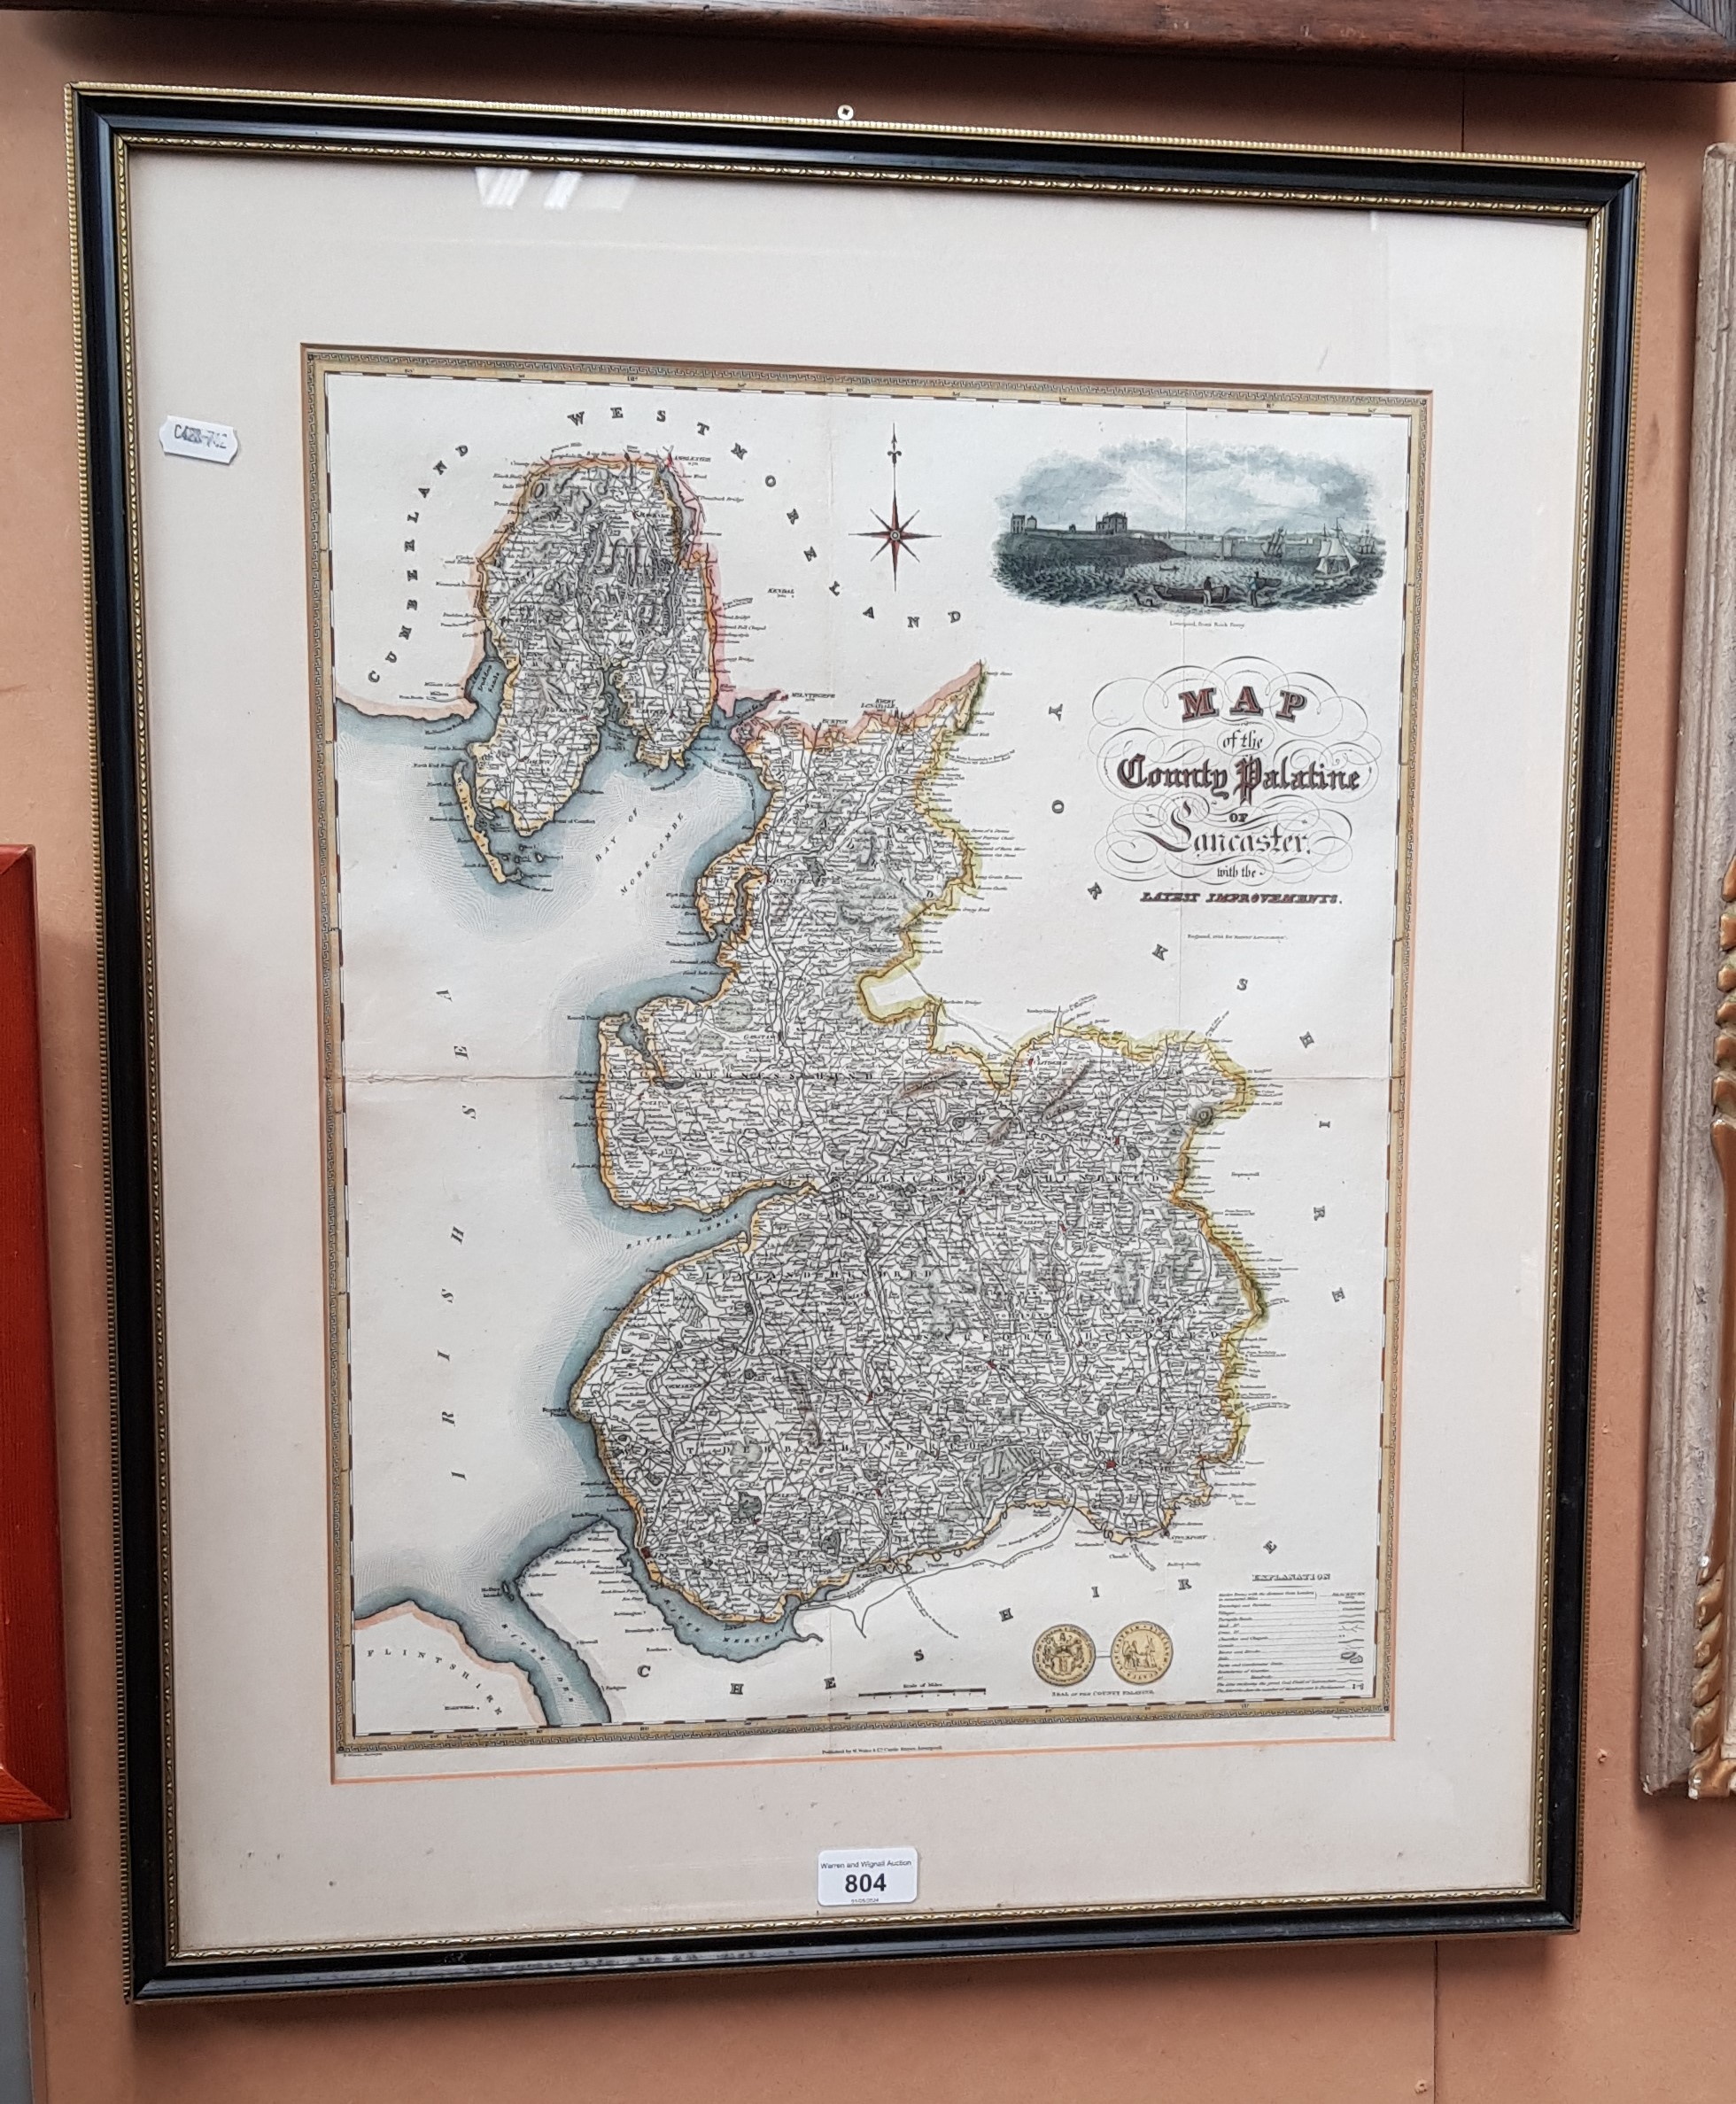 A 19th century hand coloured map of lancashire by E Baines 1824, framed and glazed, 55.5cm x 67cm.